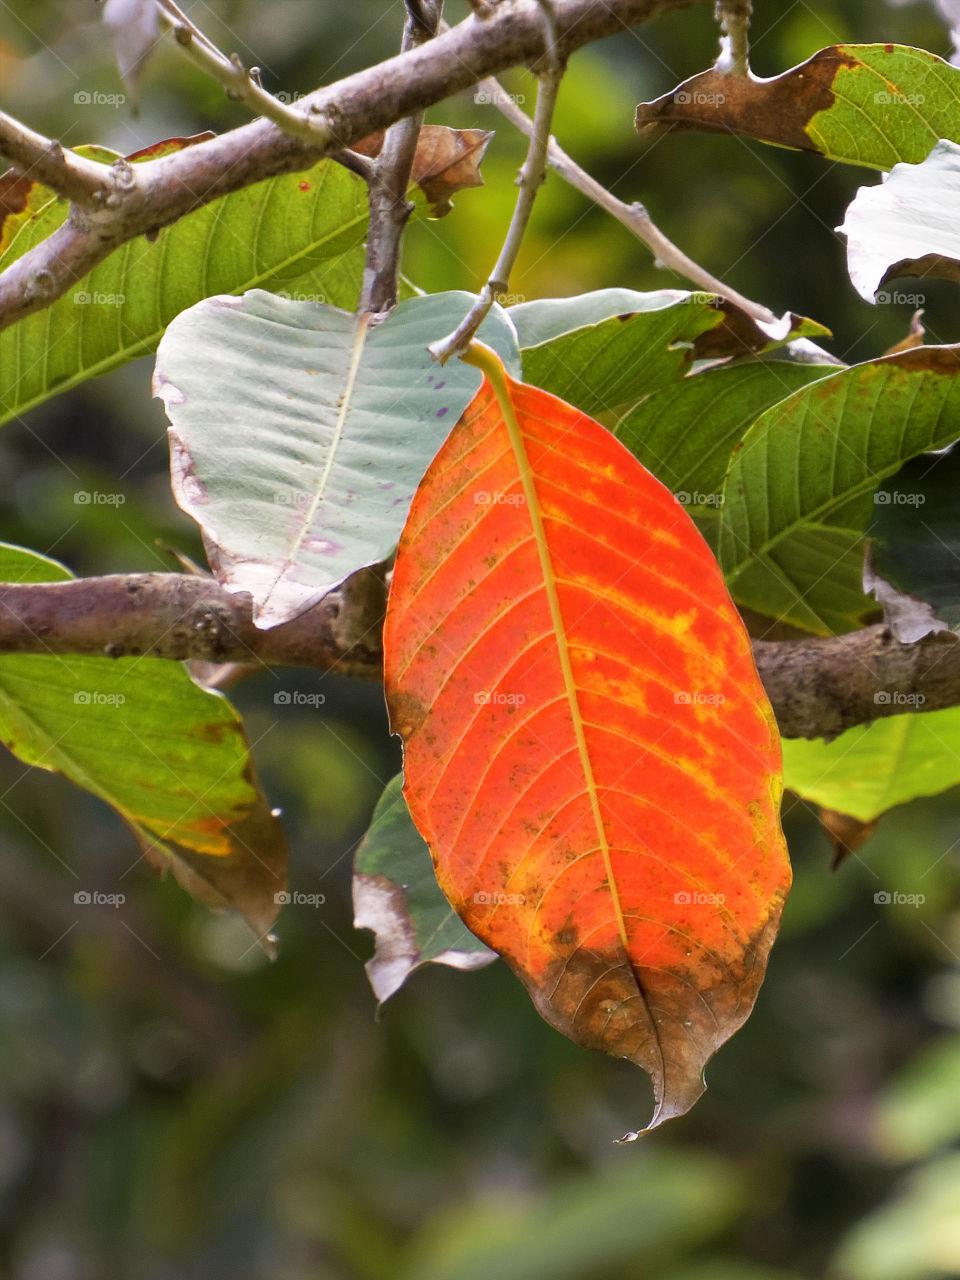 Different. one orange leaf among green leaves